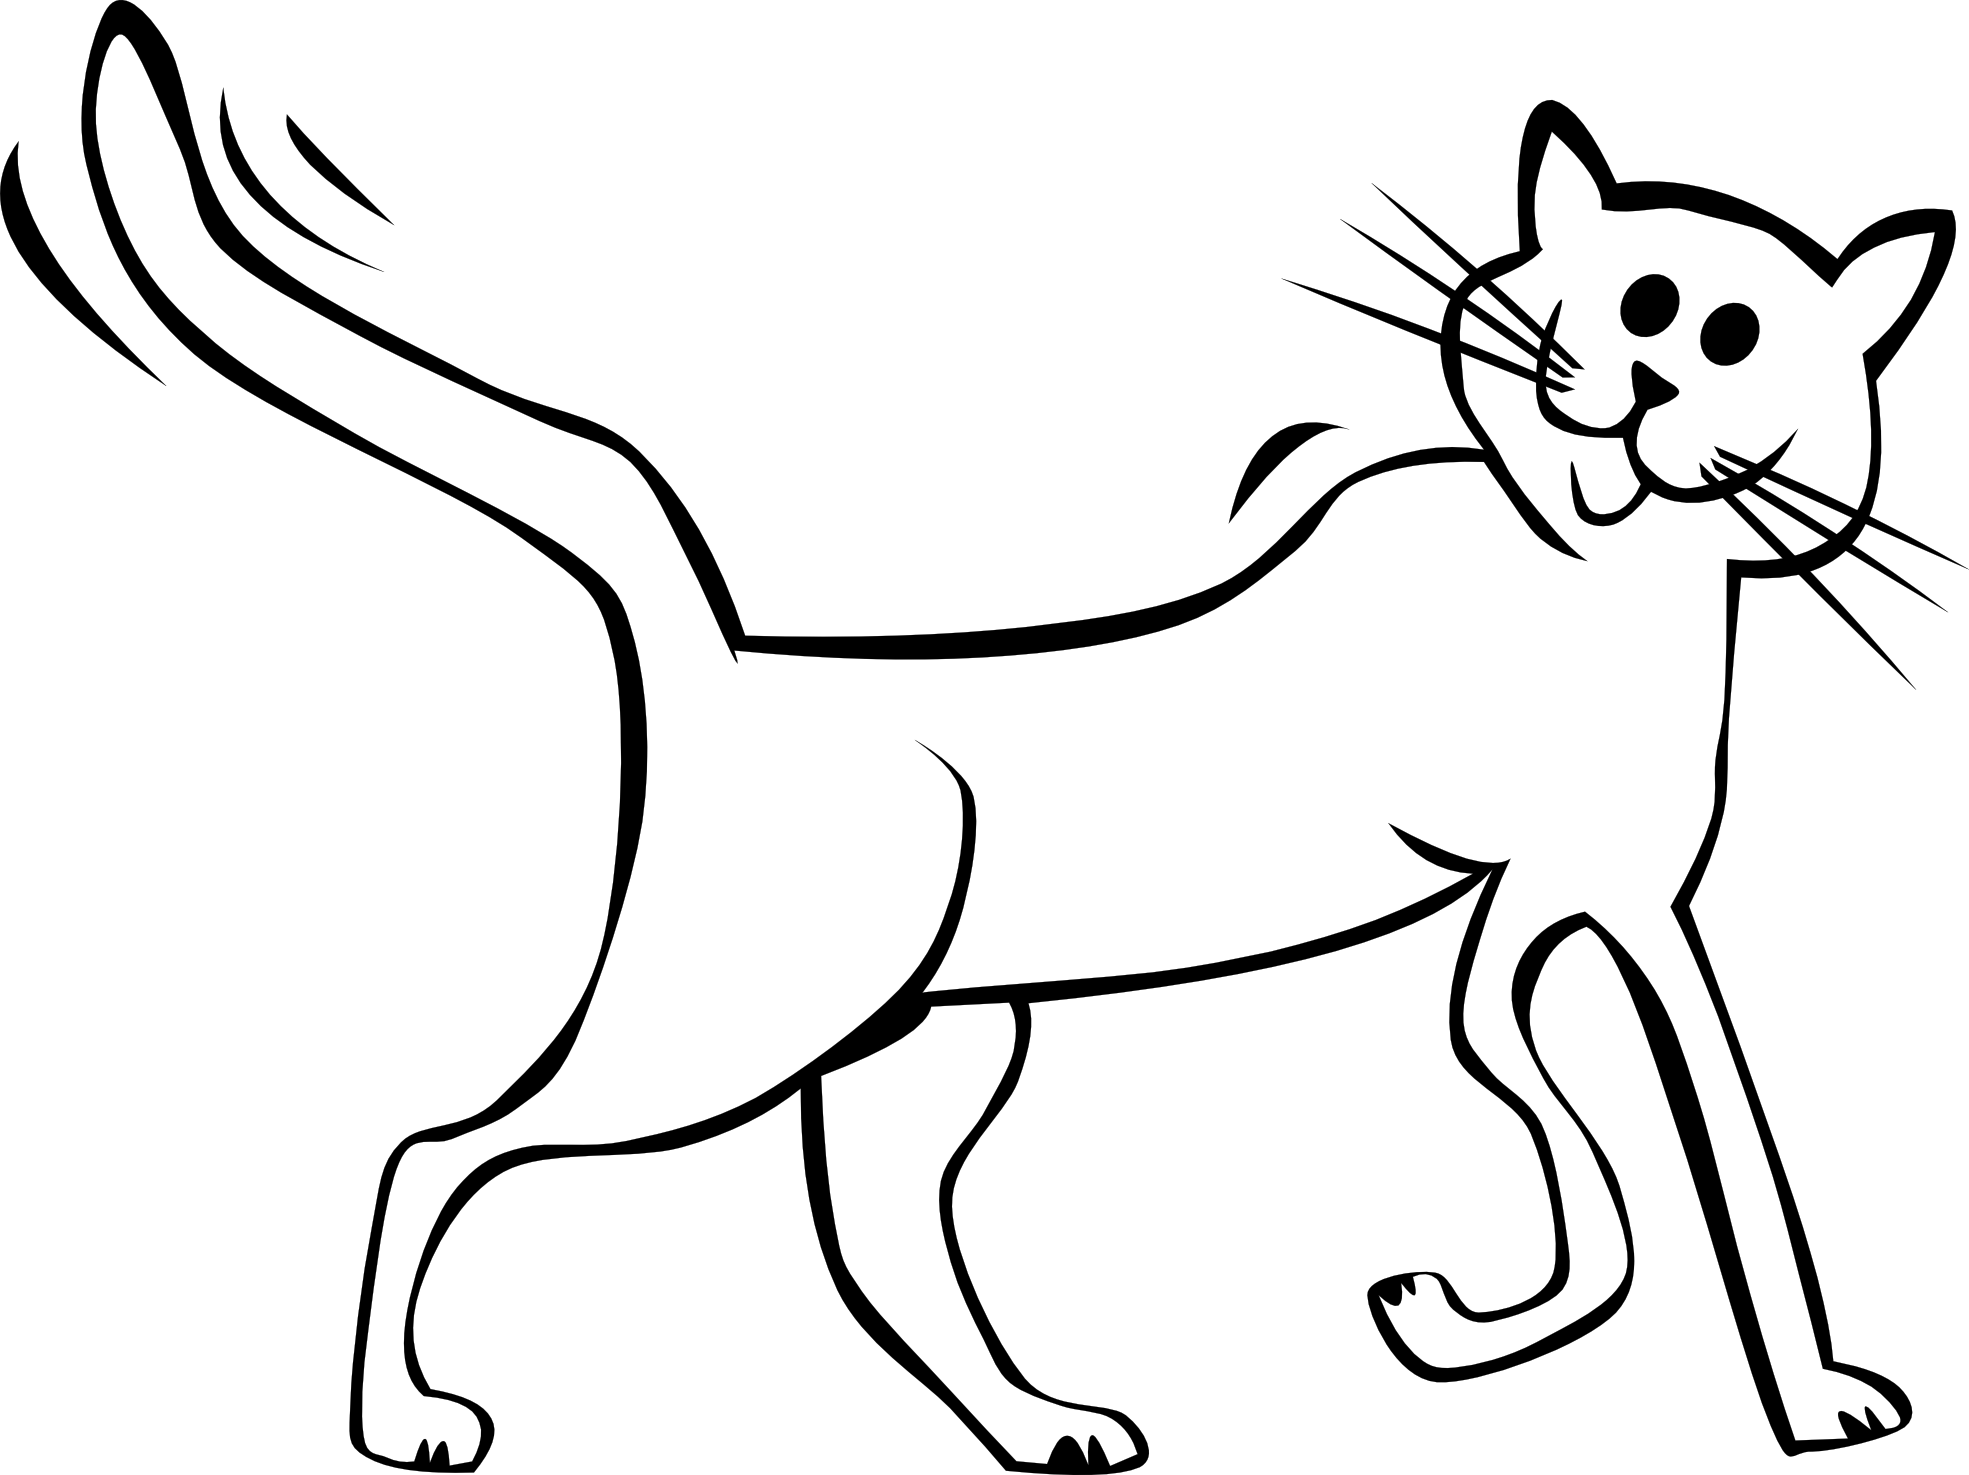 Cartoon Cat Black And White - ClipArt Best